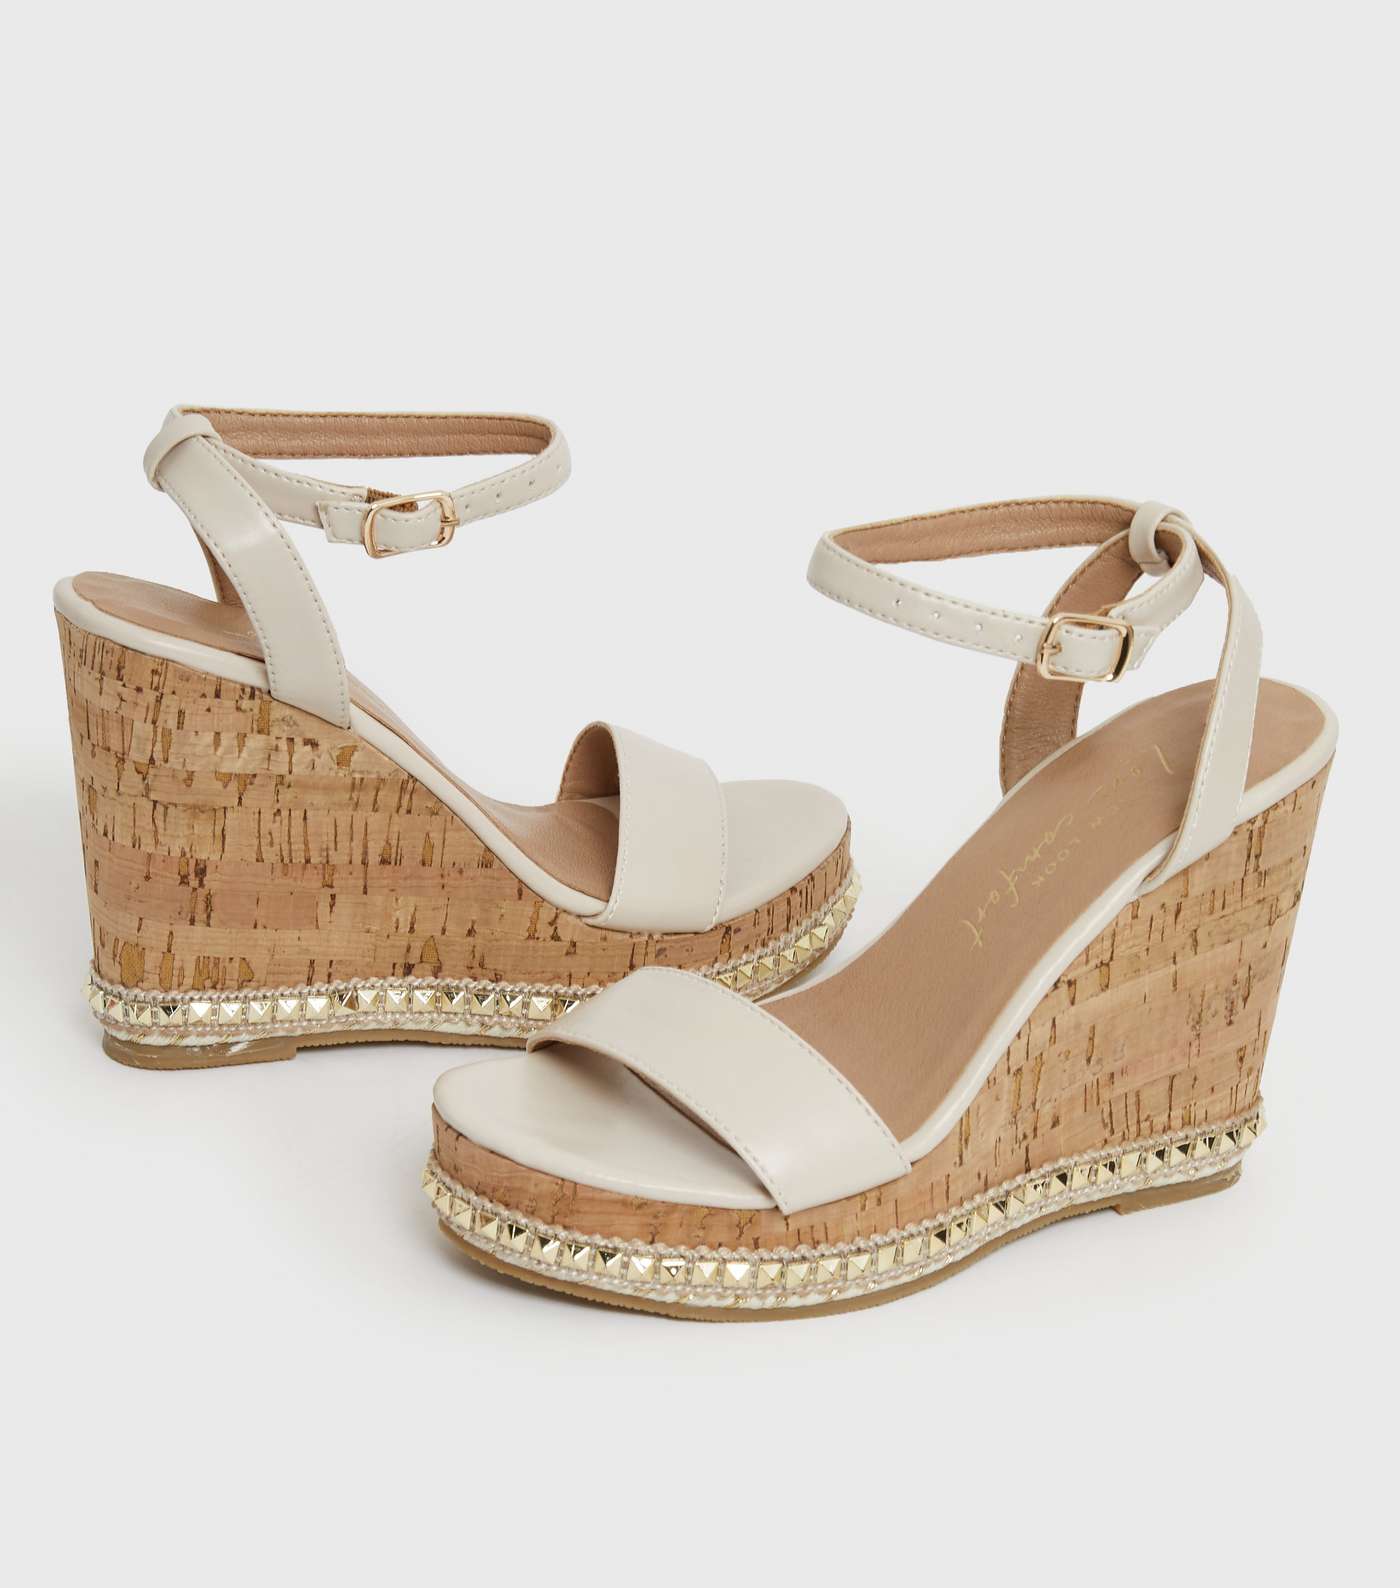 Off White Studded Faux Cork Wedge Heel Sandals Image 3